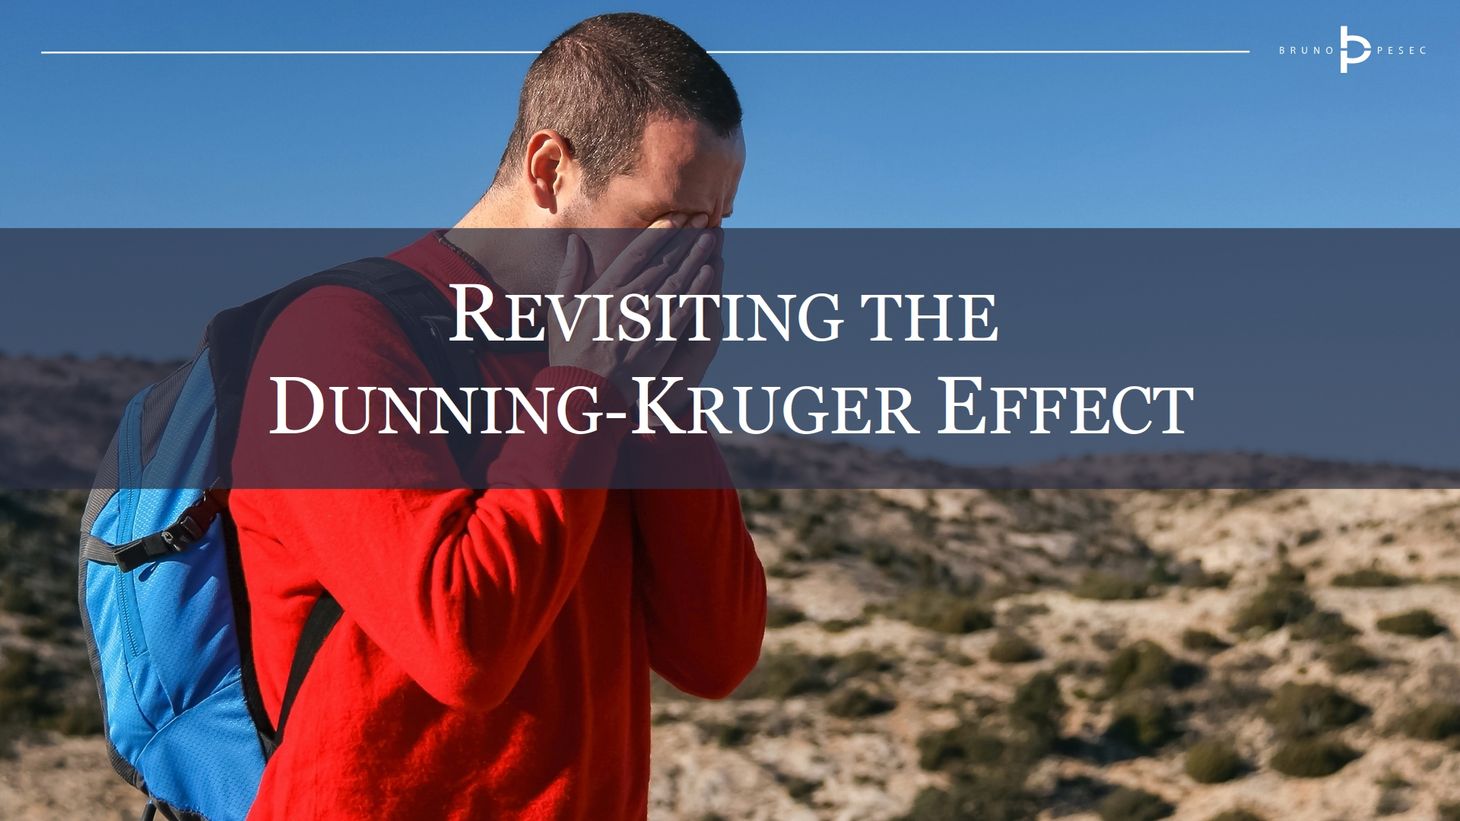 Revisiting the Dunning-Kruger effect